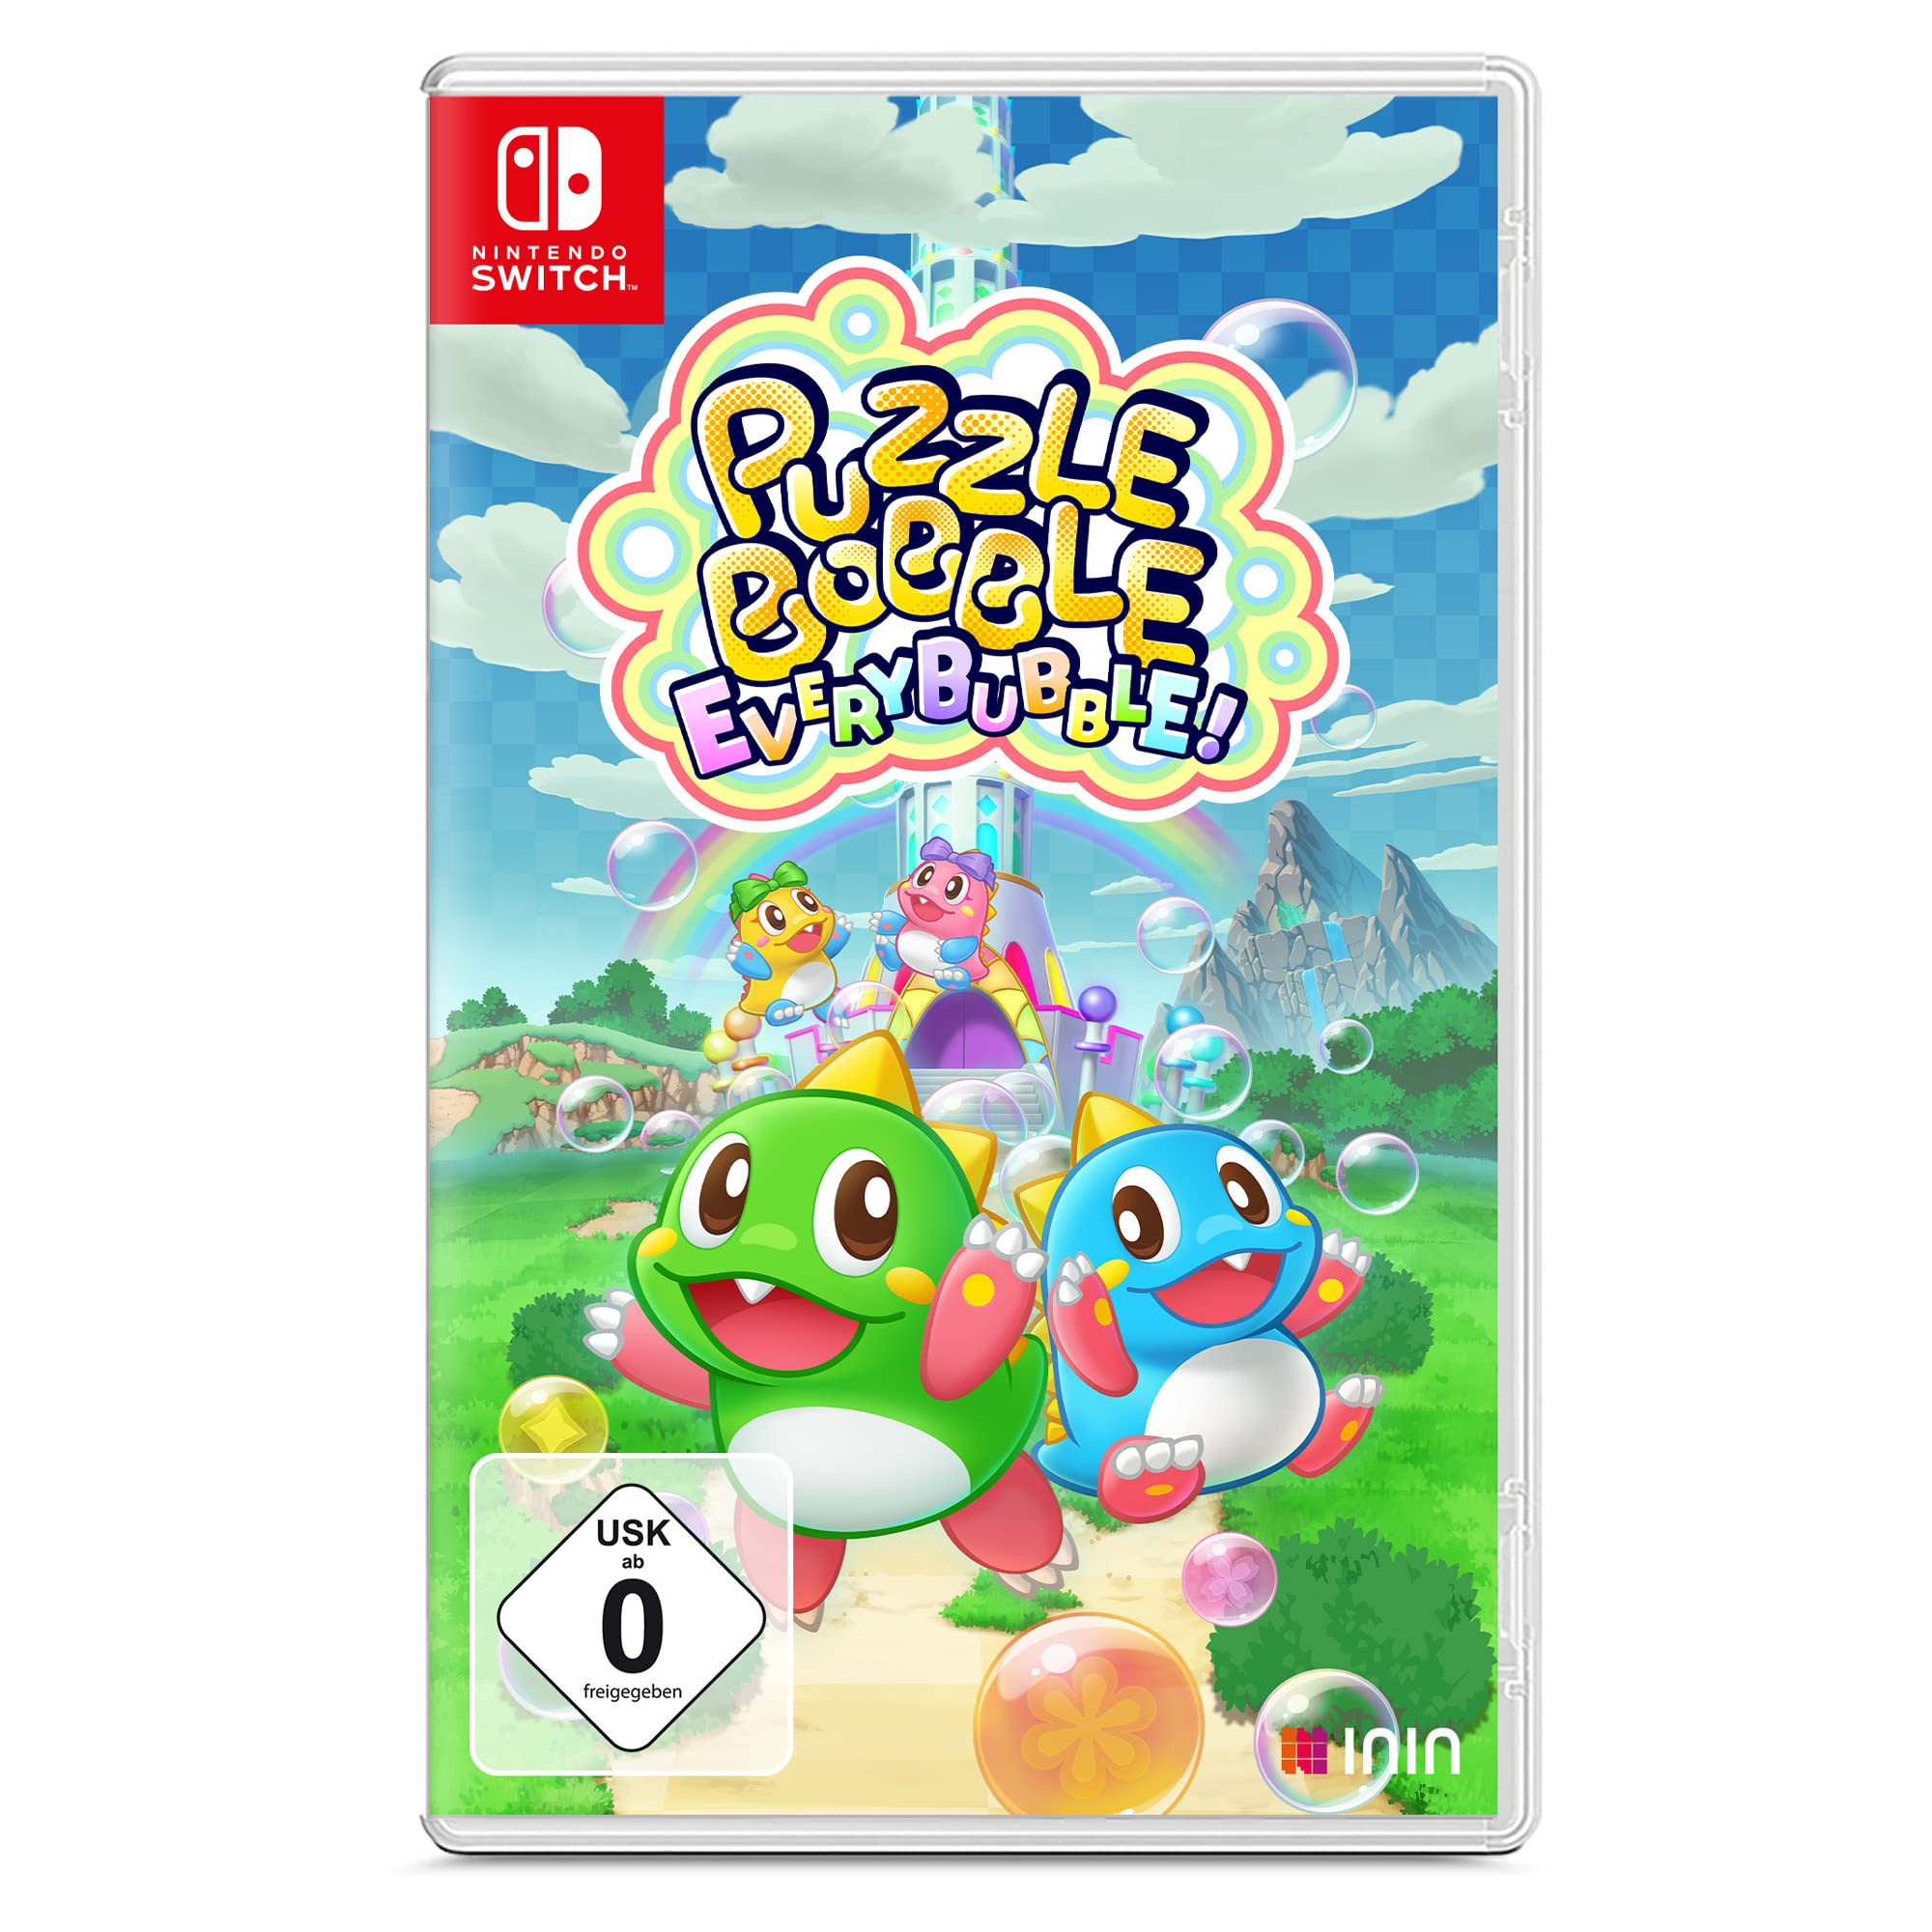 Puzzle Bobble Everybubble - [Switch]